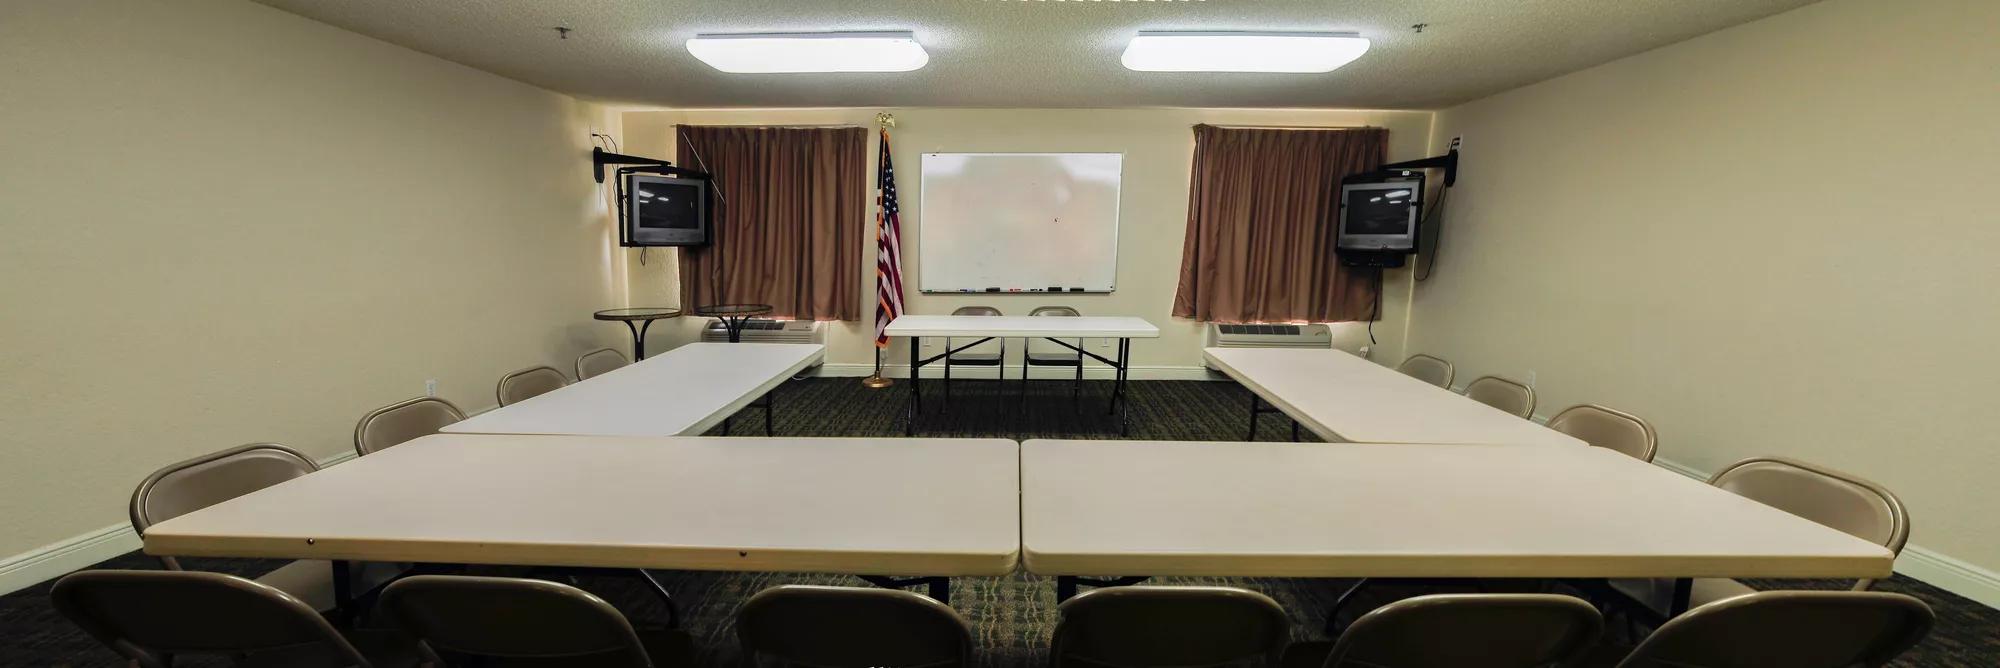 Conference room image